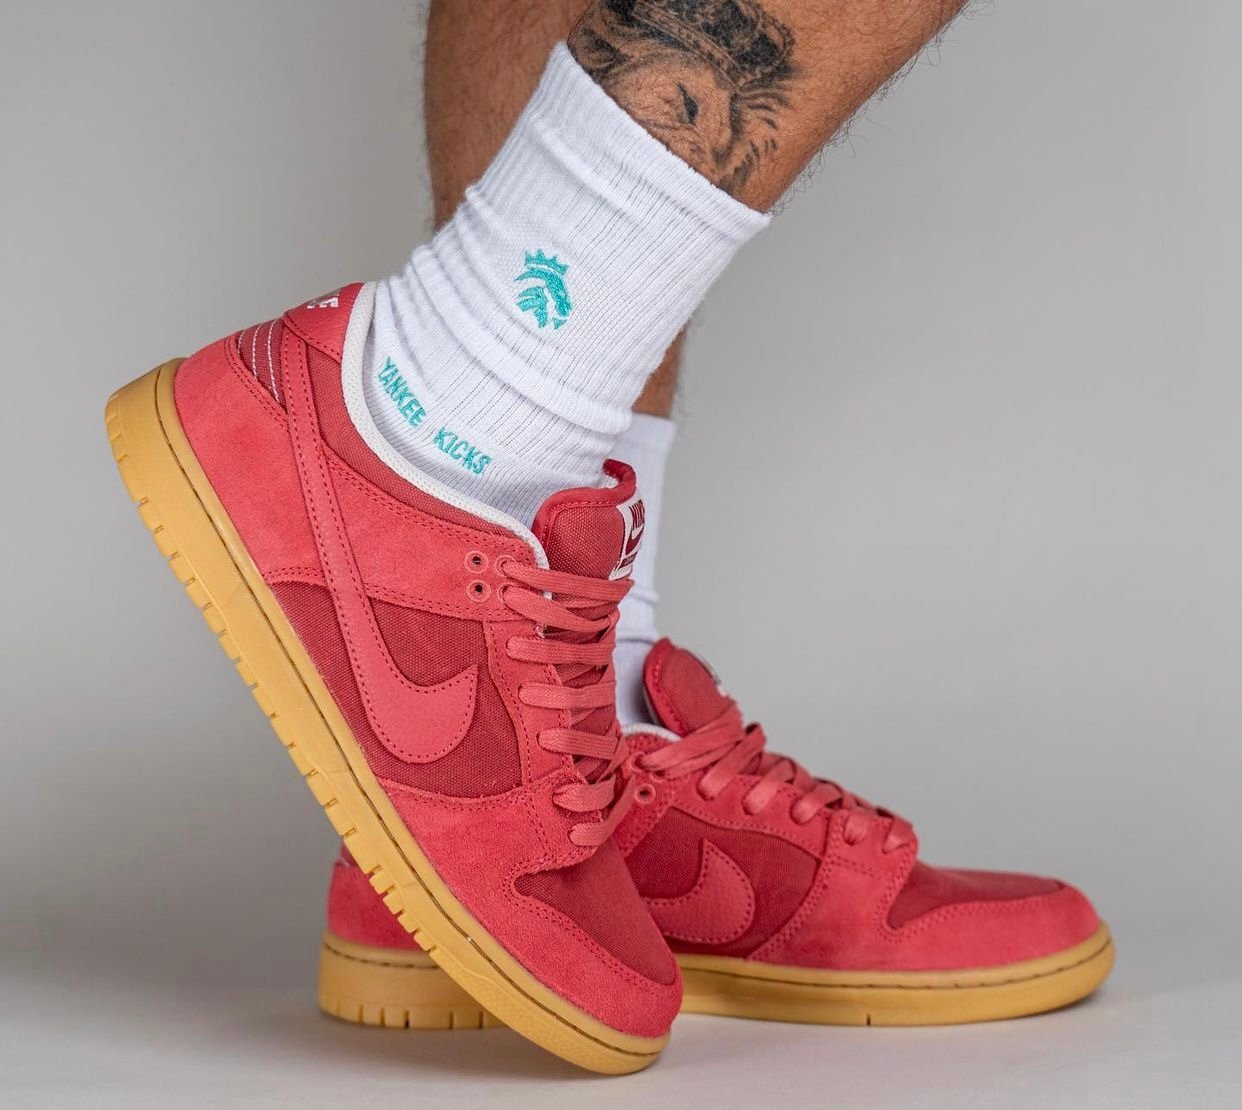 Nike SB Dunk Low Adobe DV5429-600 Release Date + Where to Buy